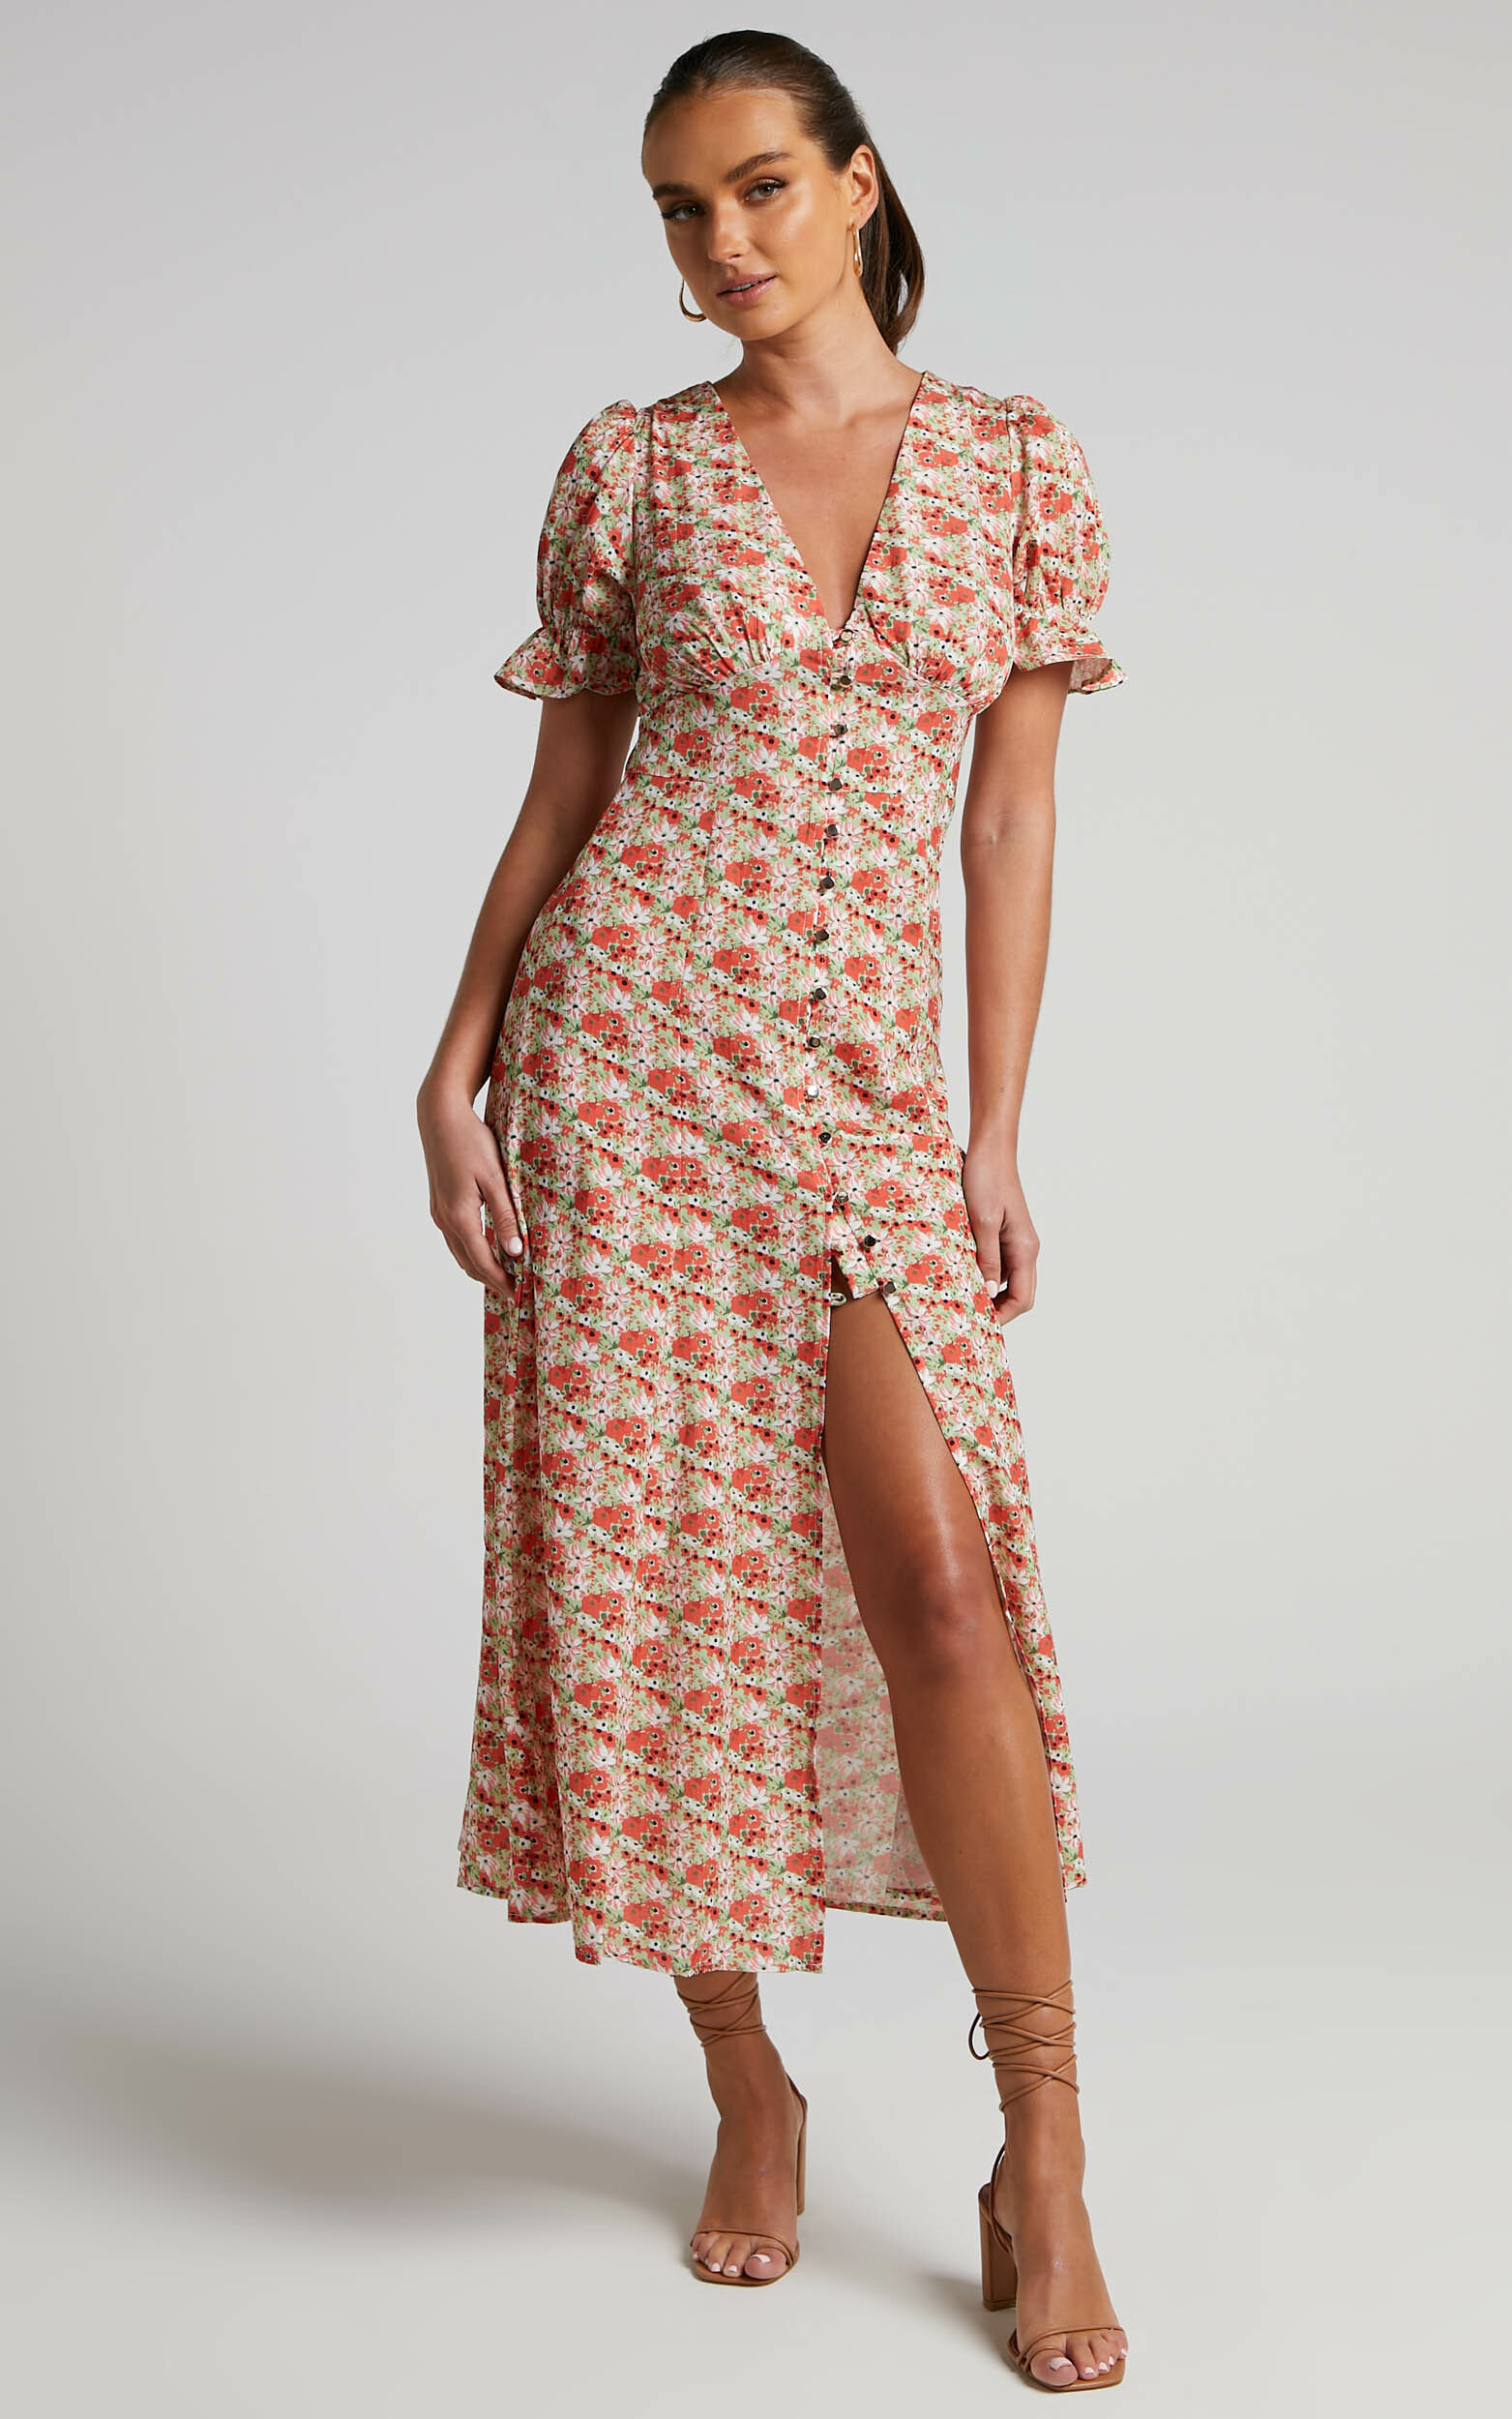 Adalina Maxi Dress - Short Puff Sleeve Button Down Dress in Pink Floral - 04, PNK1, hi-res image number null